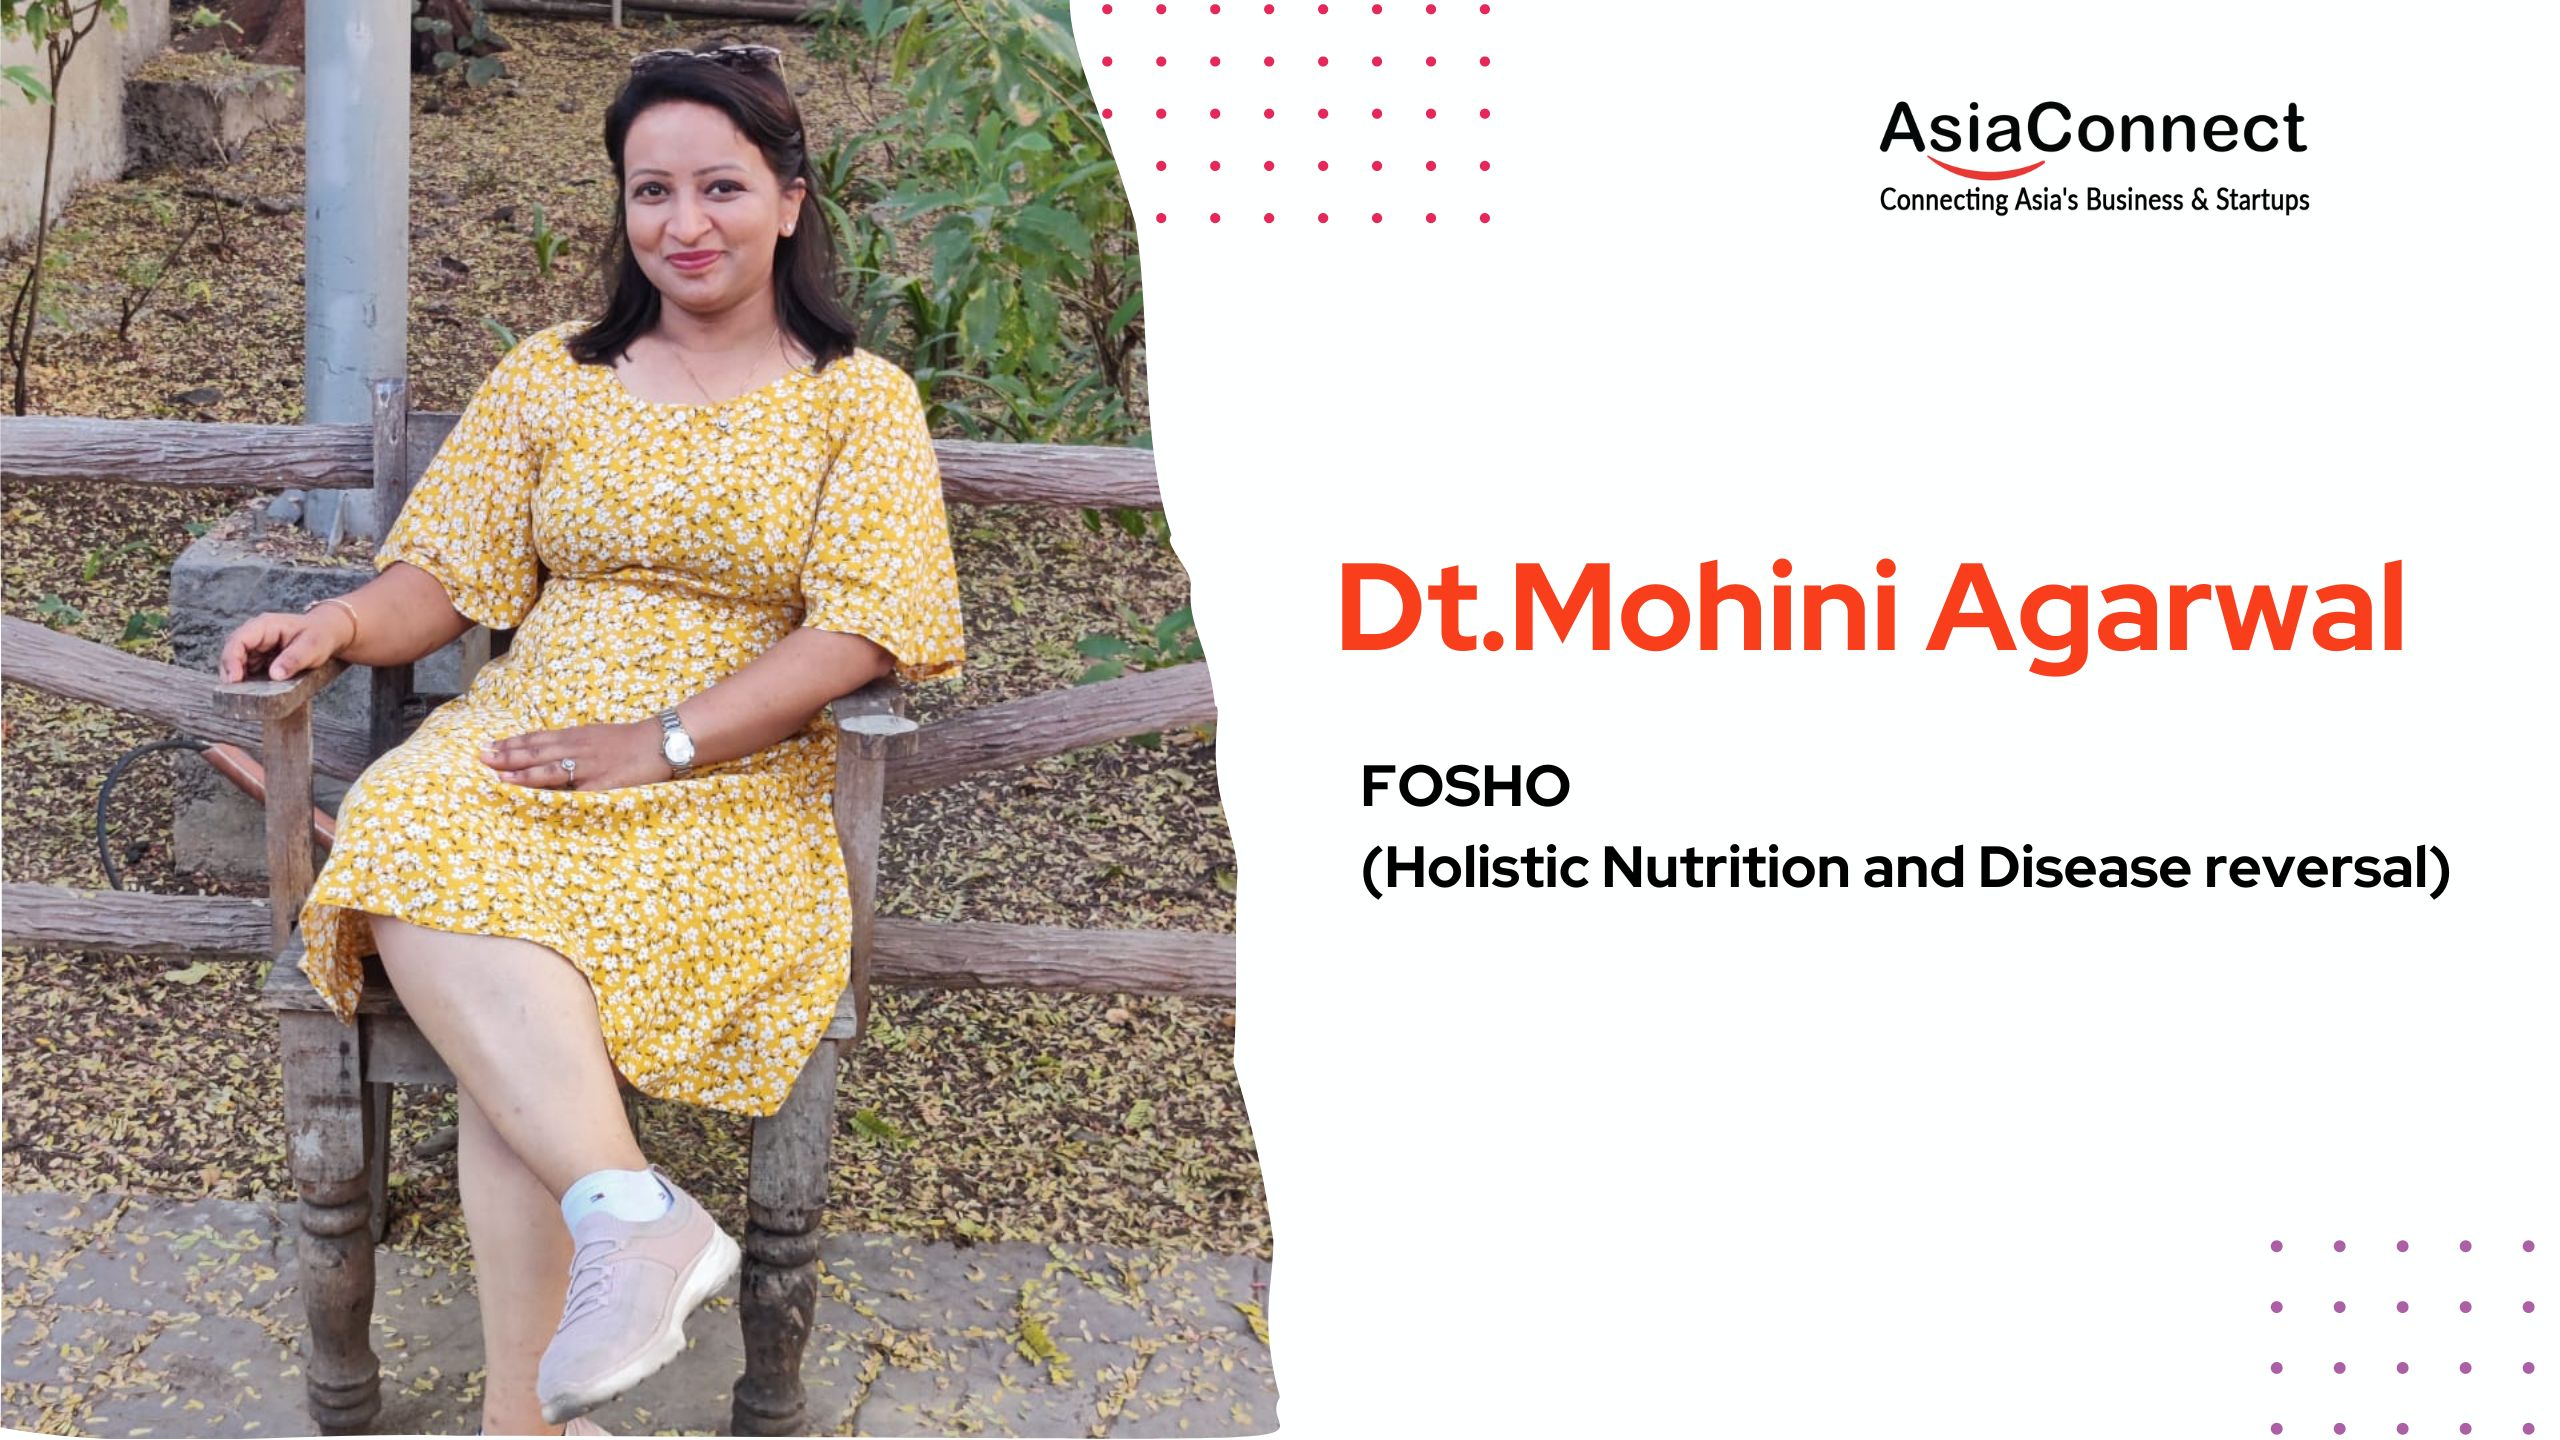 FOSHO – Holistic Nutrition and Disease Reversal